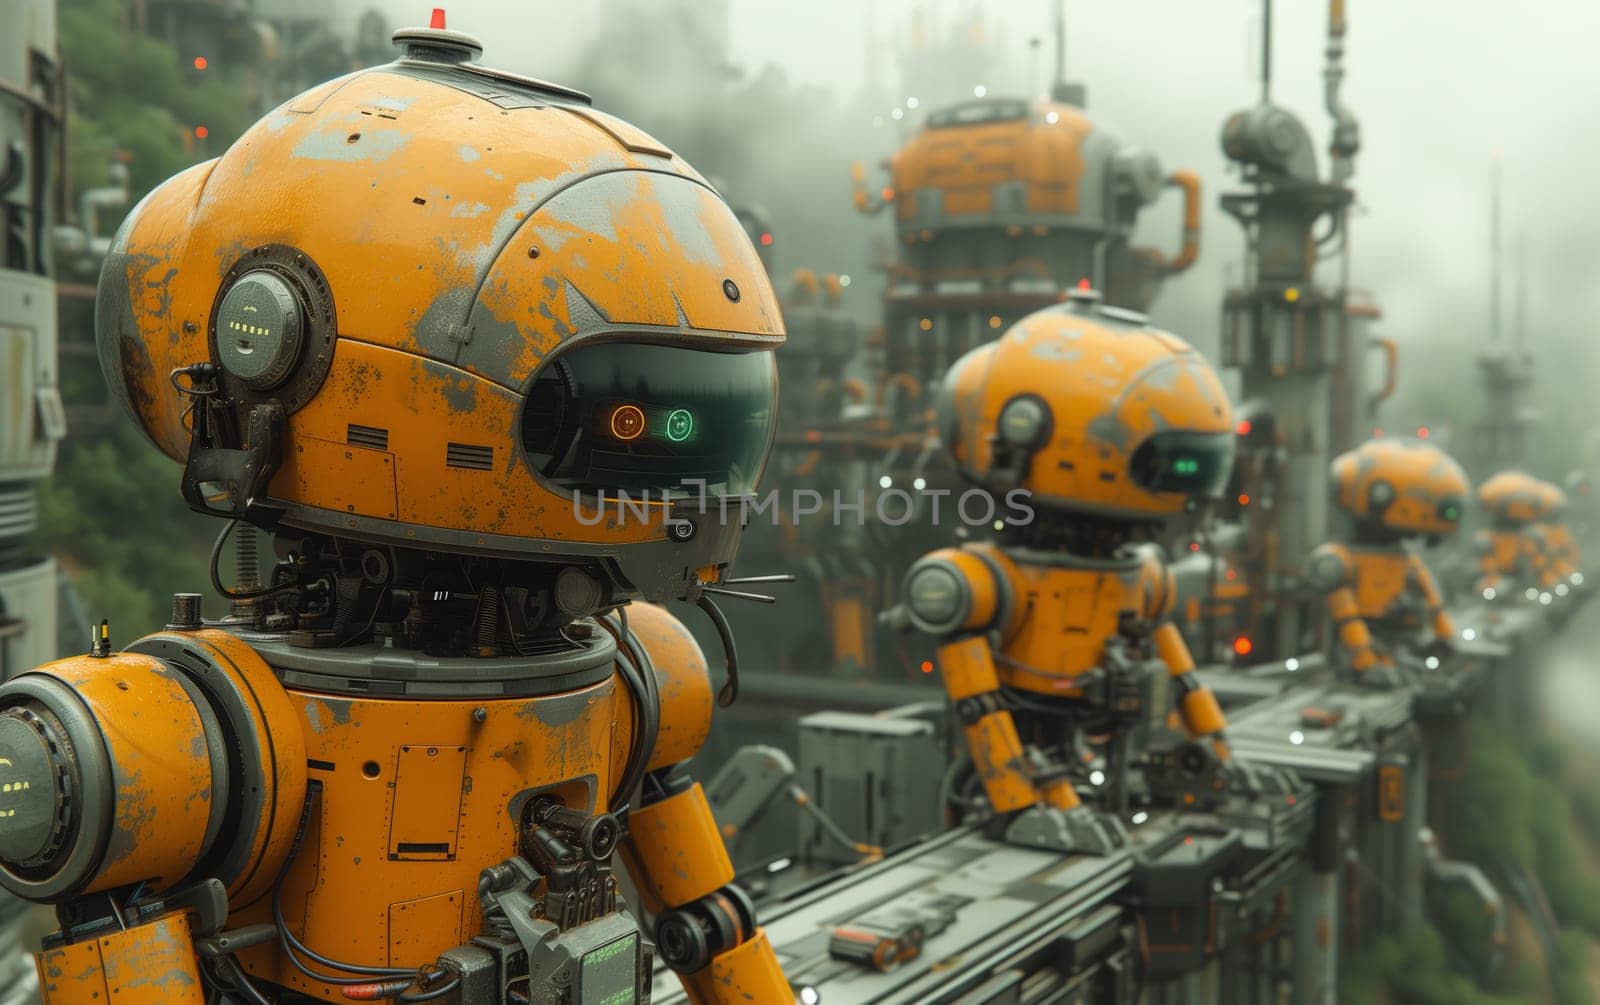 Row of orange robots lined up on a bridge in a Scifi event by richwolf